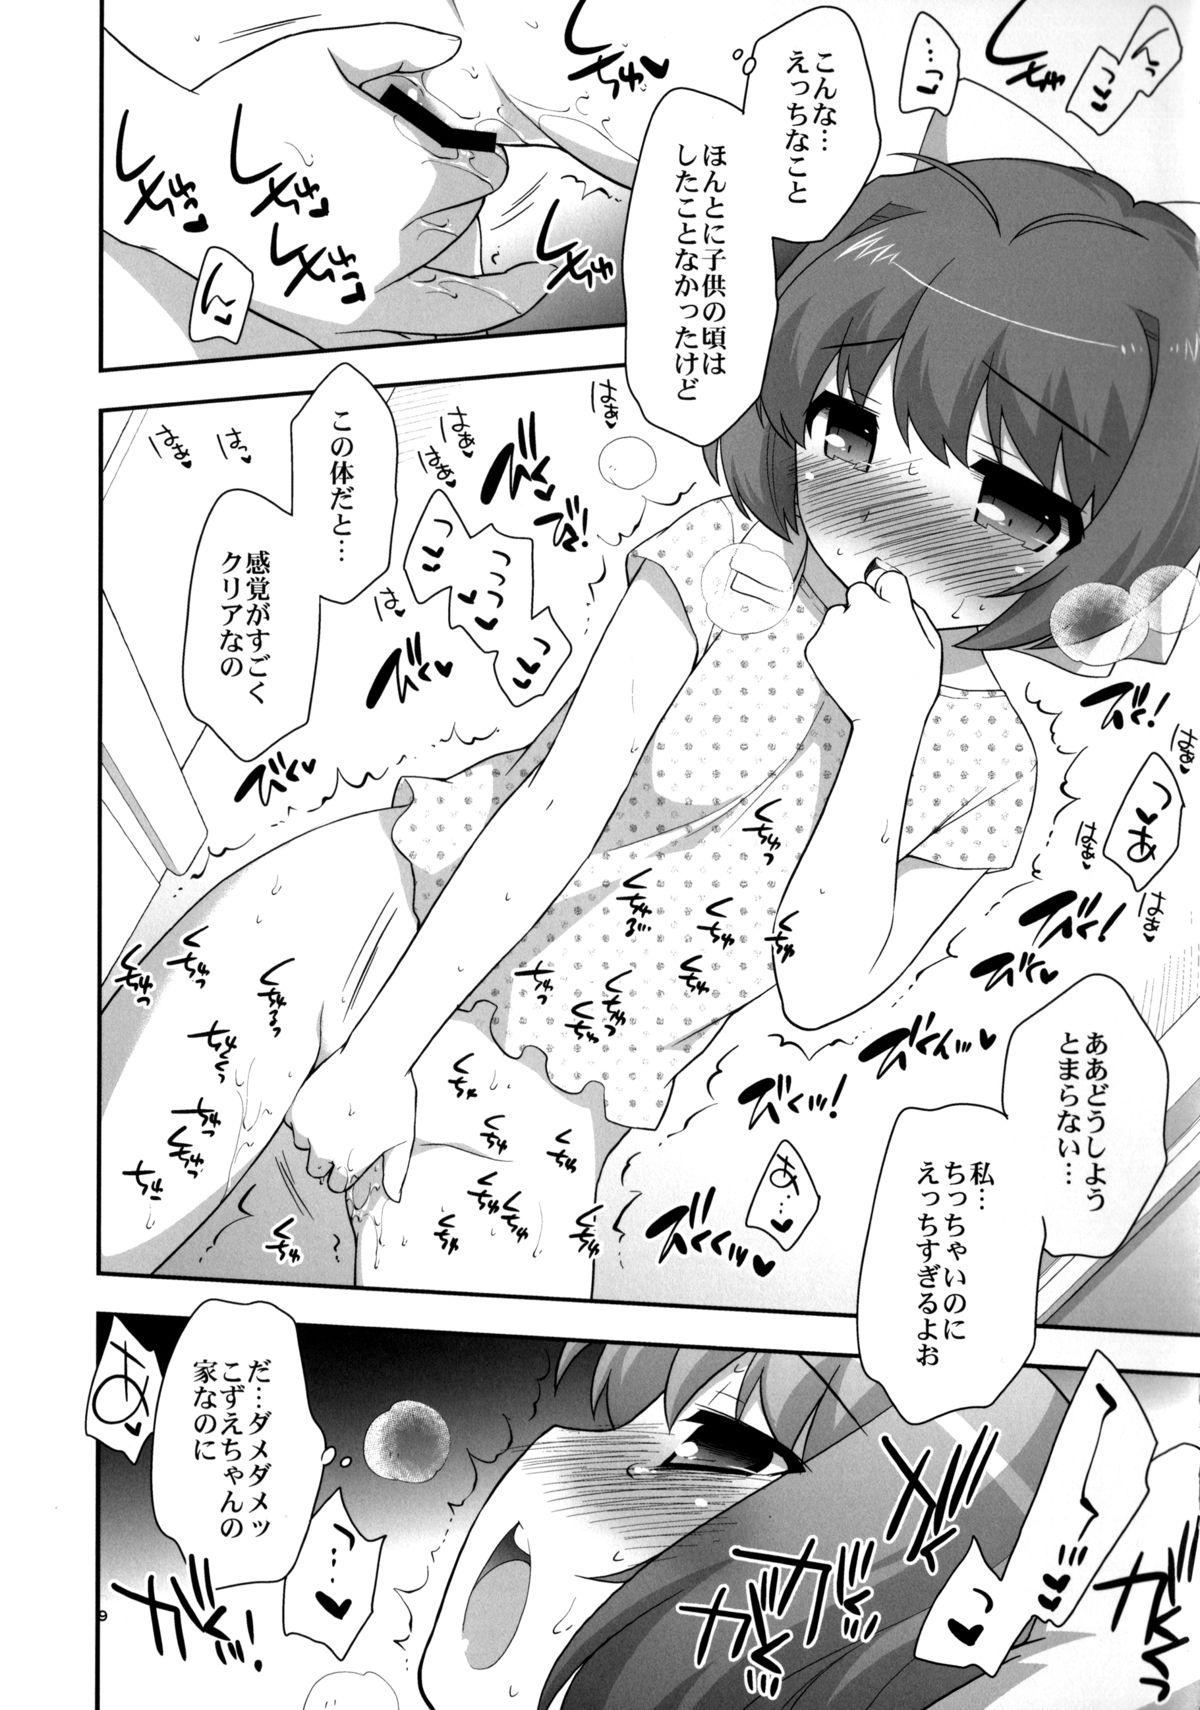 Toilet Marorara - The world god only knows Chibola - Page 8